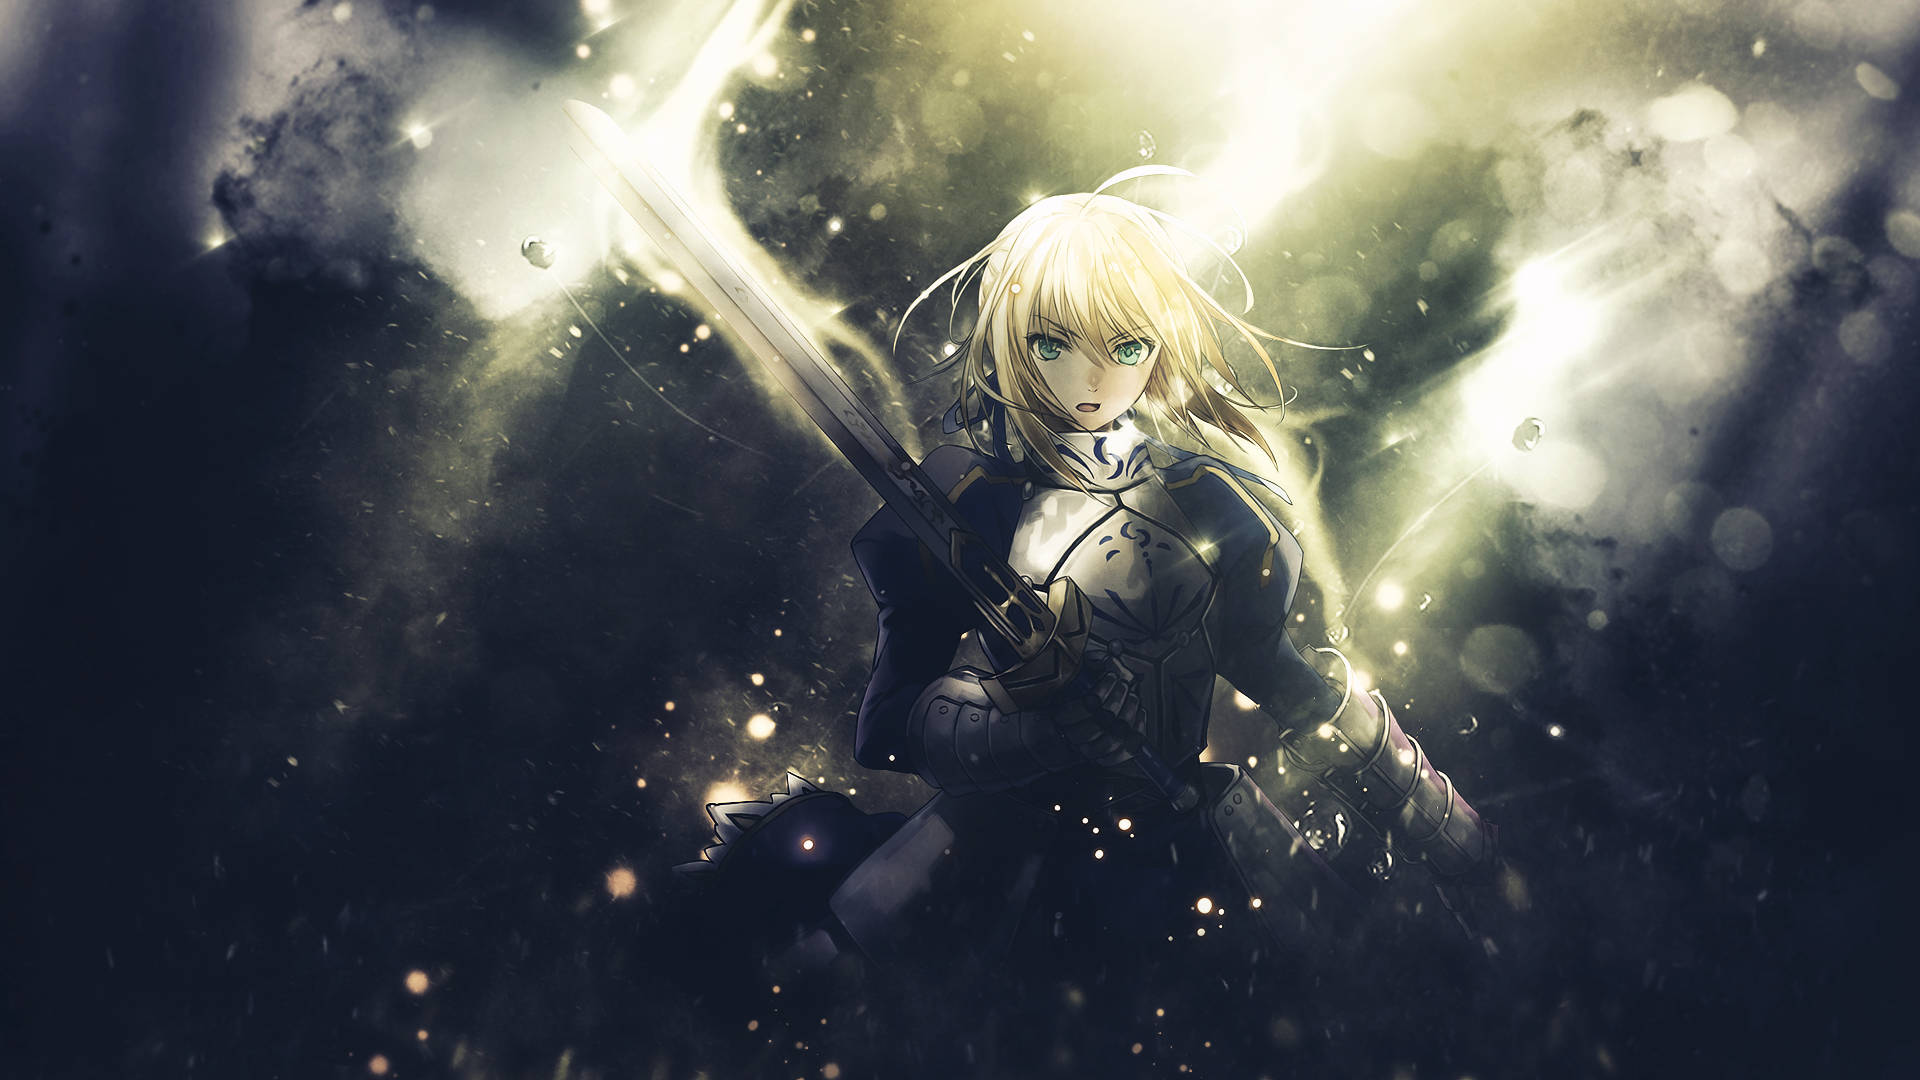 Fate Zero With Saber Holding A Sword Wallpaper